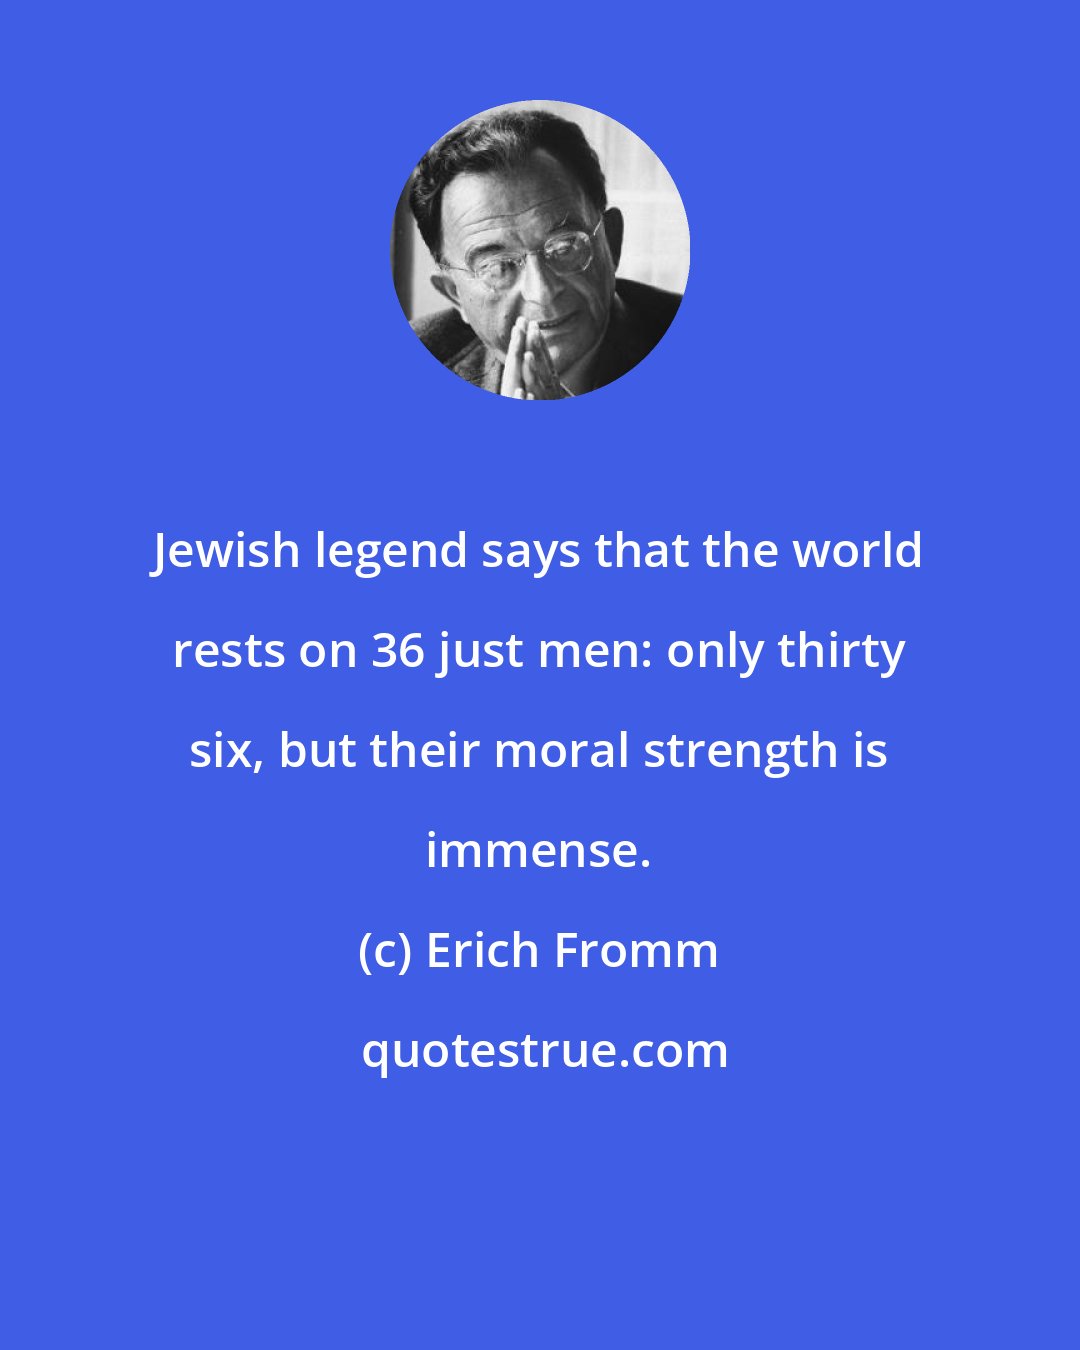 Erich Fromm: Jewish legend says that the world rests on 36 just men: only thirty six, but their moral strength is immense.